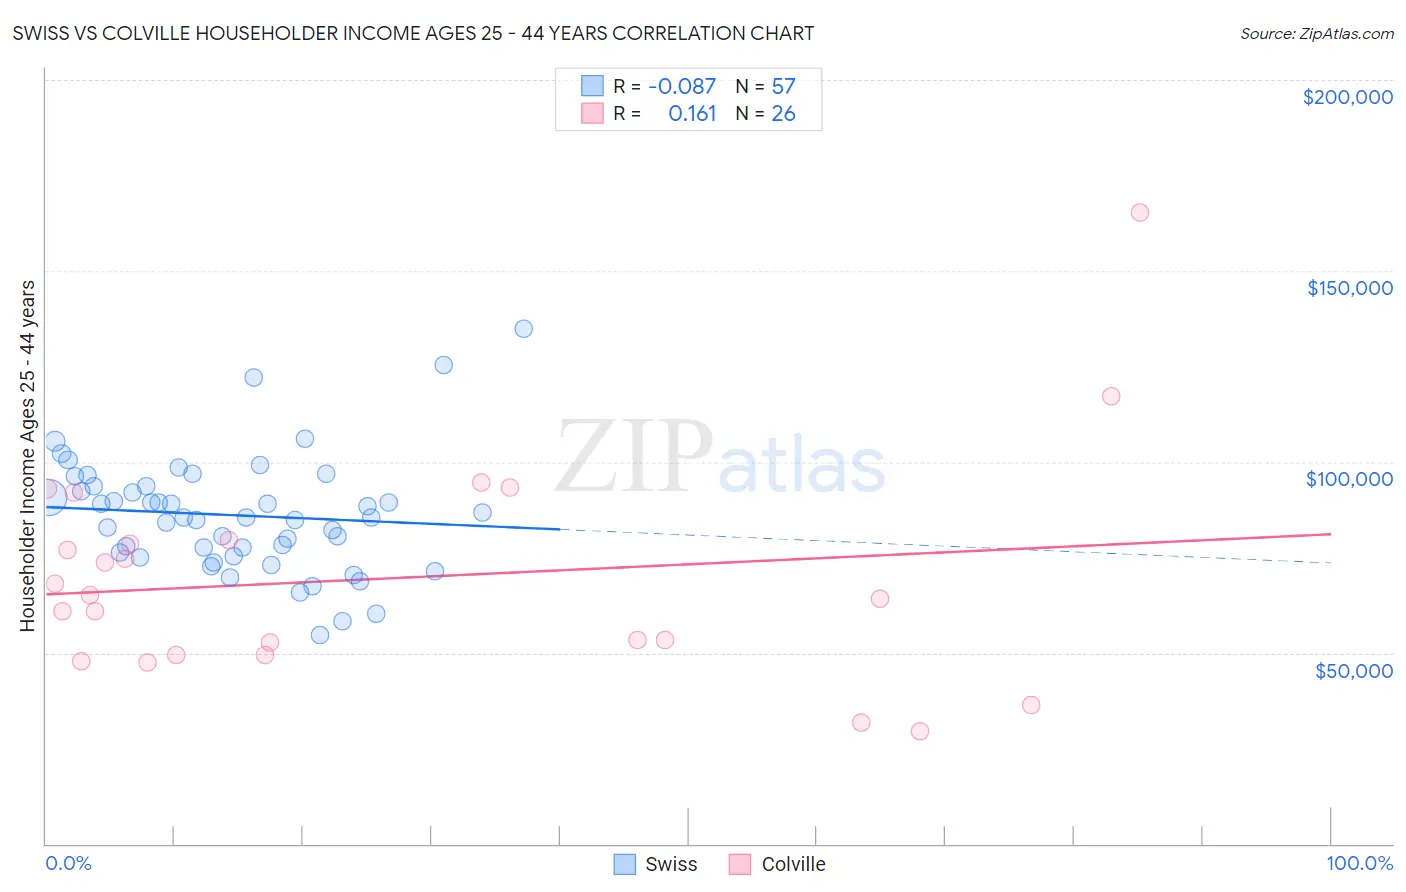 Swiss vs Colville Householder Income Ages 25 - 44 years